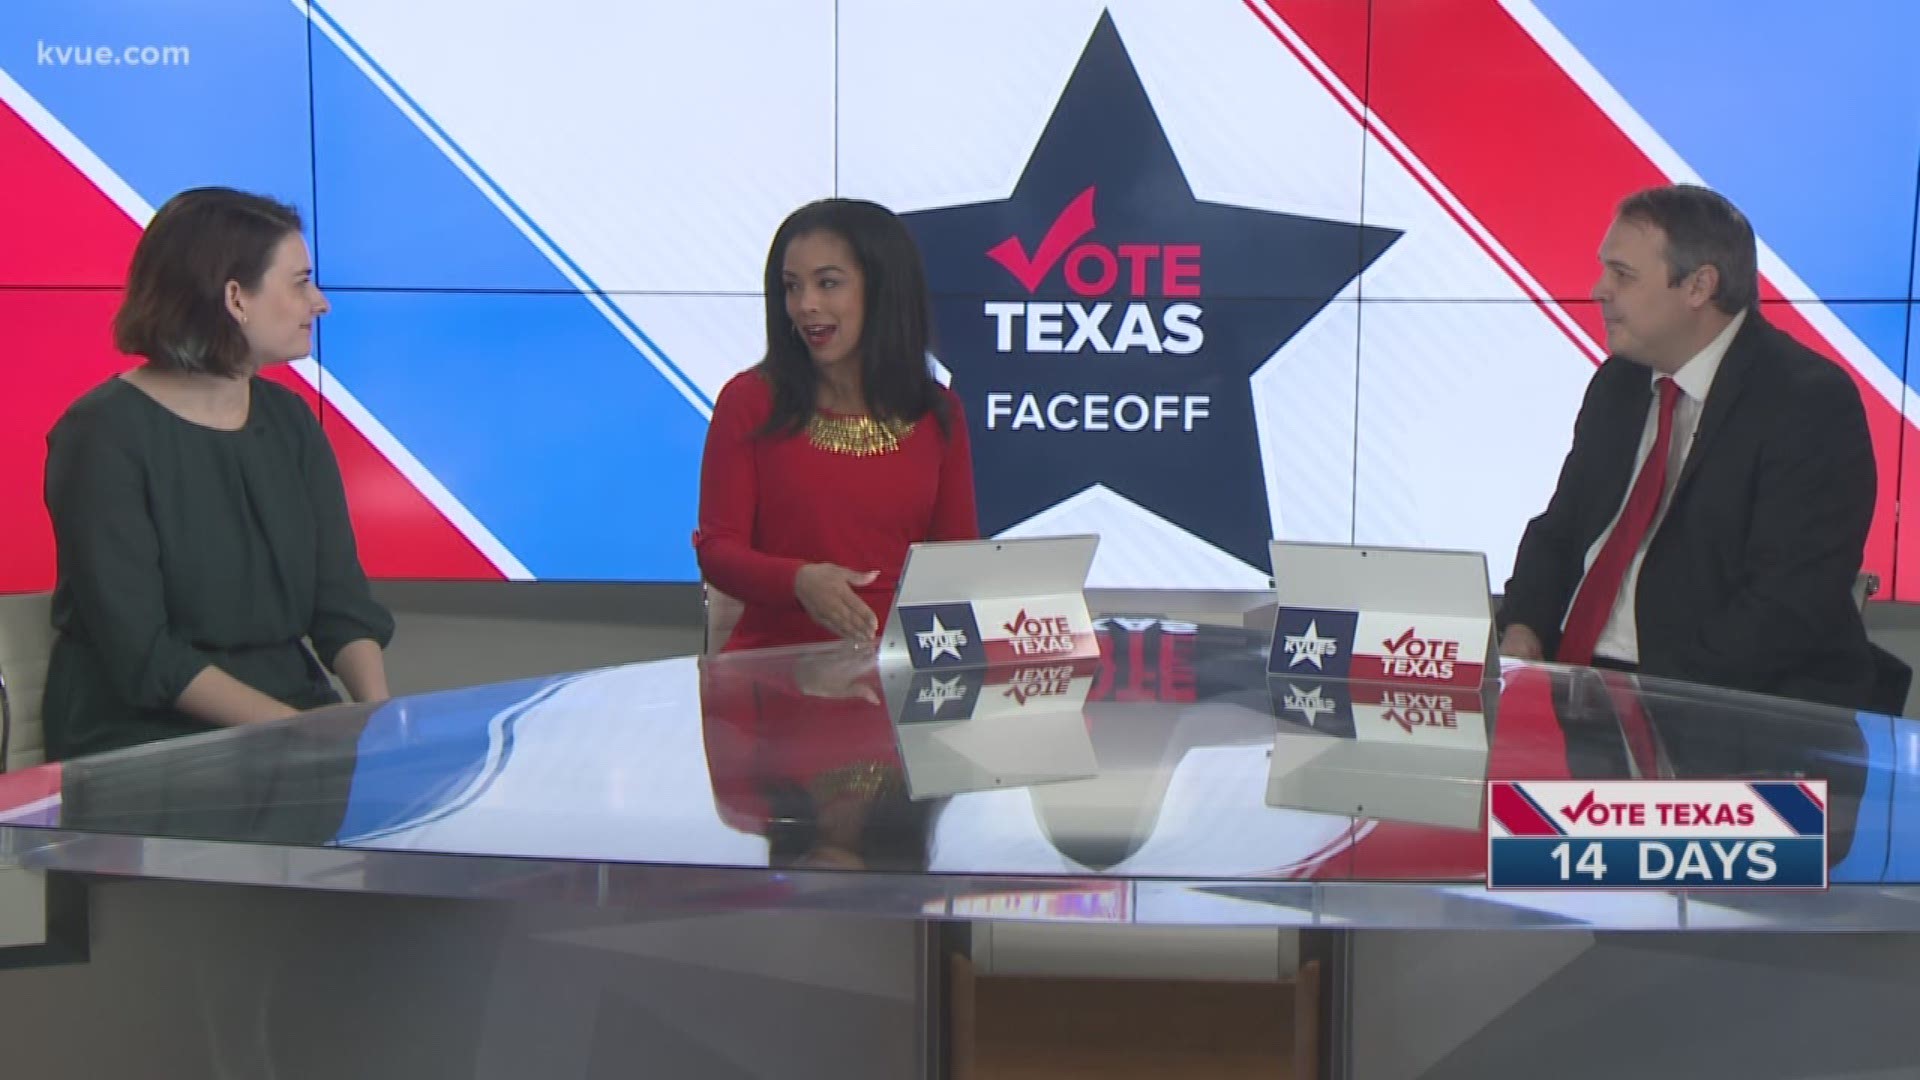 Vote Texas Face Off: Two weeks away from the midterm elections